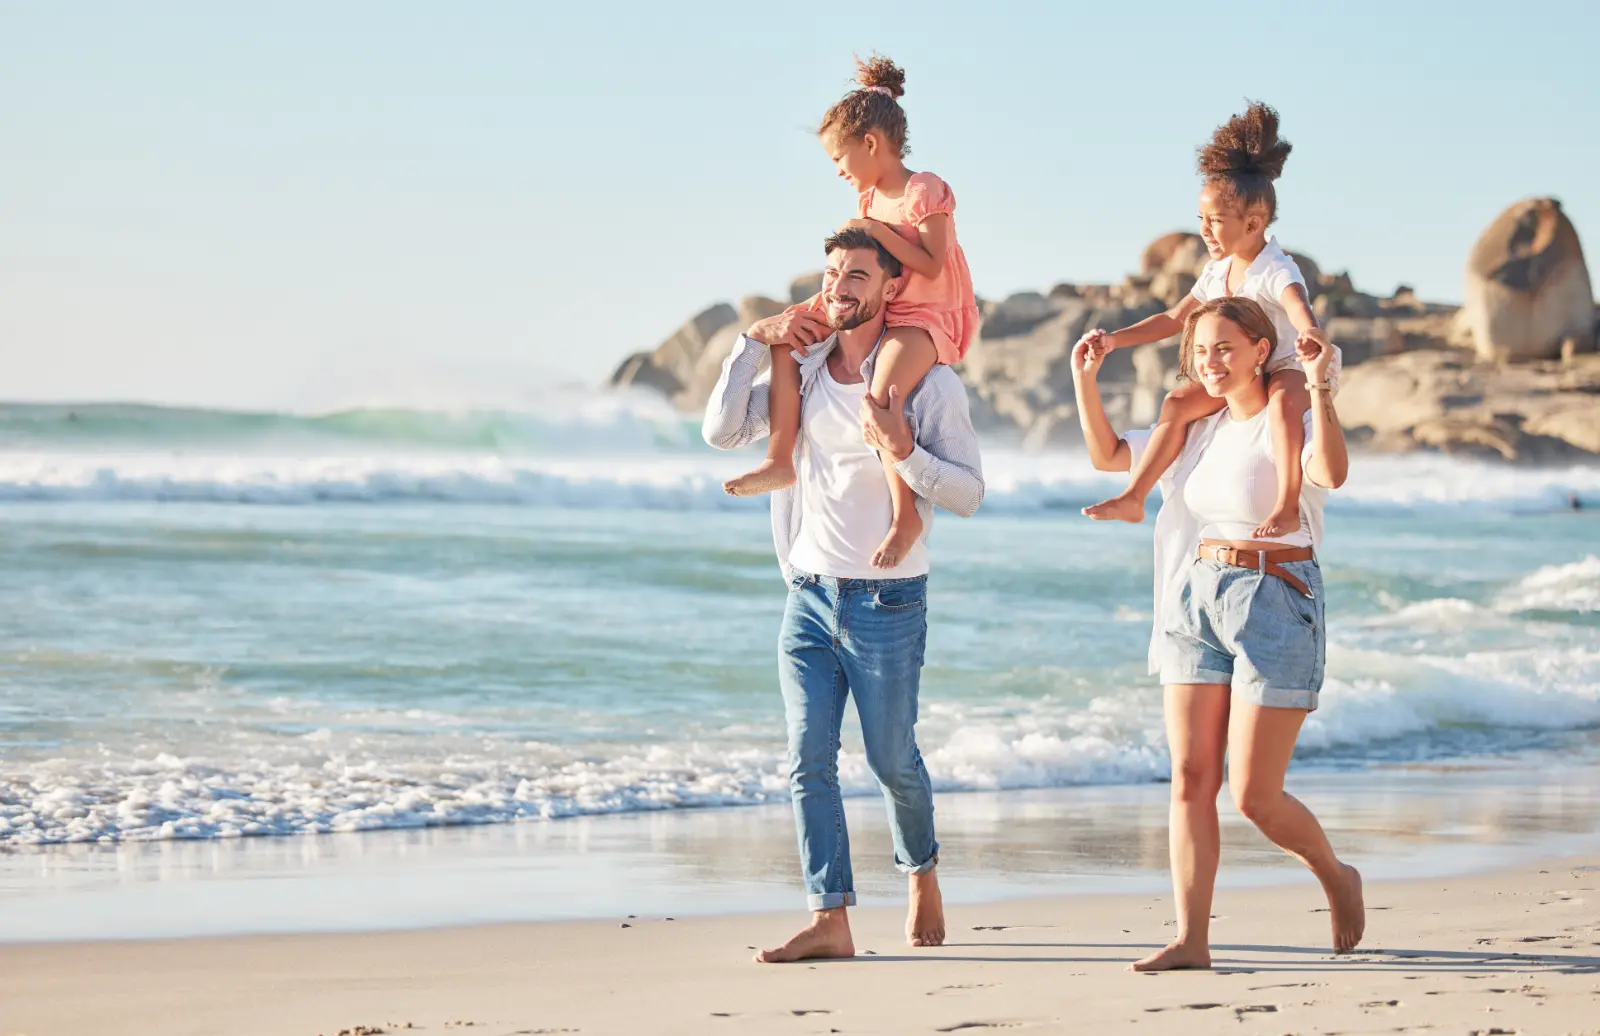 Contact Frequencies in Adoption Agreements: Explore a harmonious family journey with parents and kids enjoying a beach stroll.